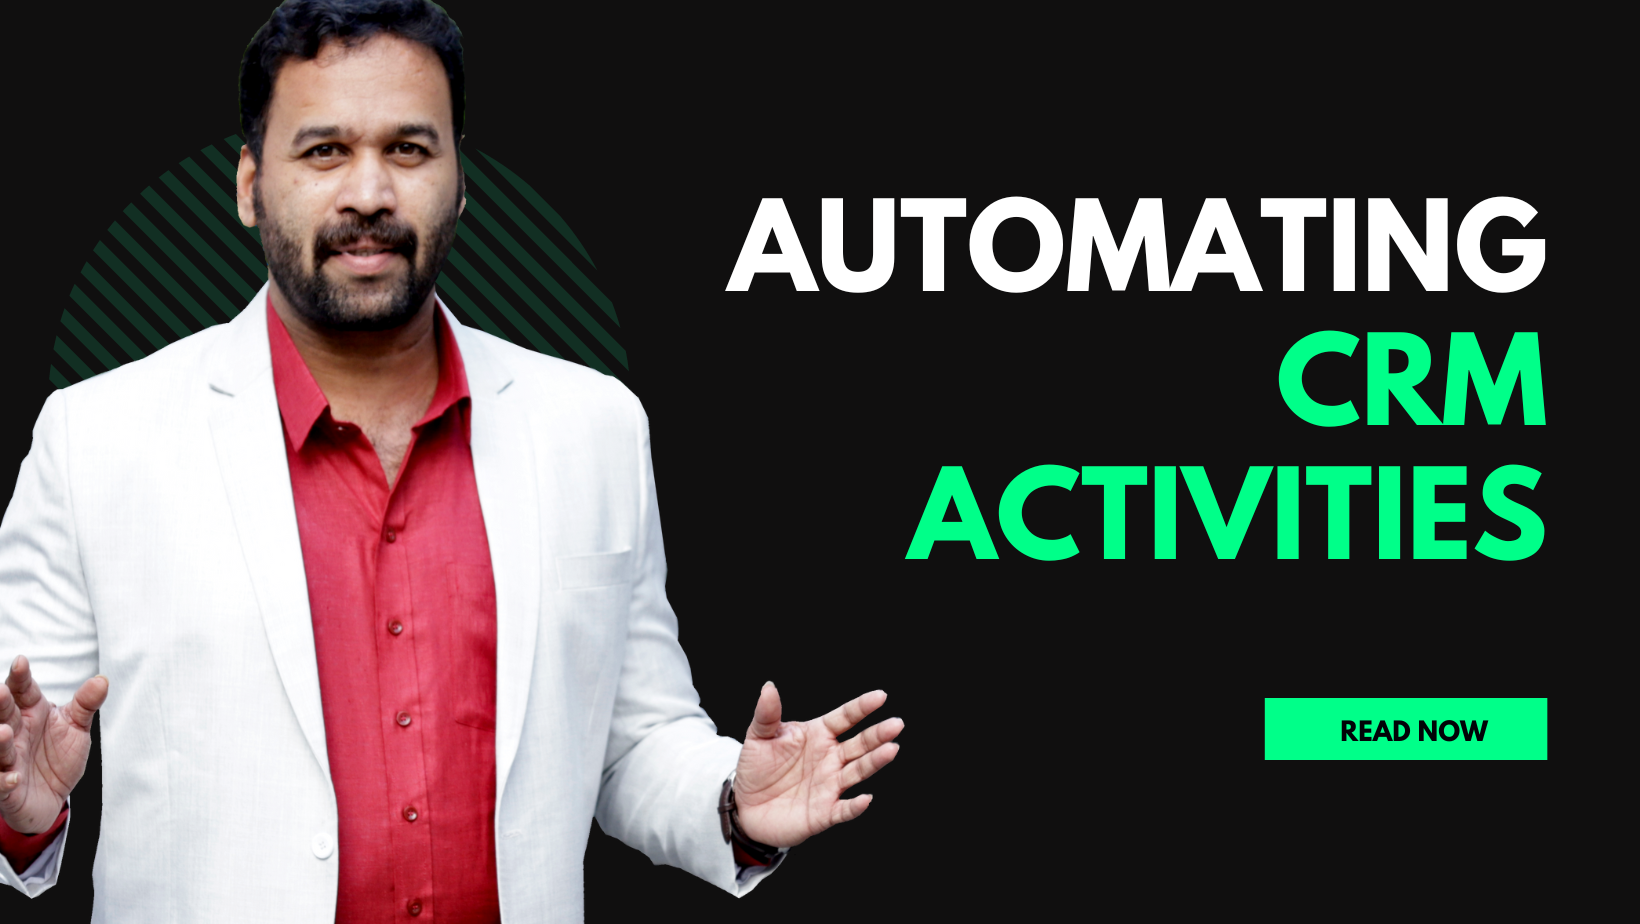 How to automate CRM activities?